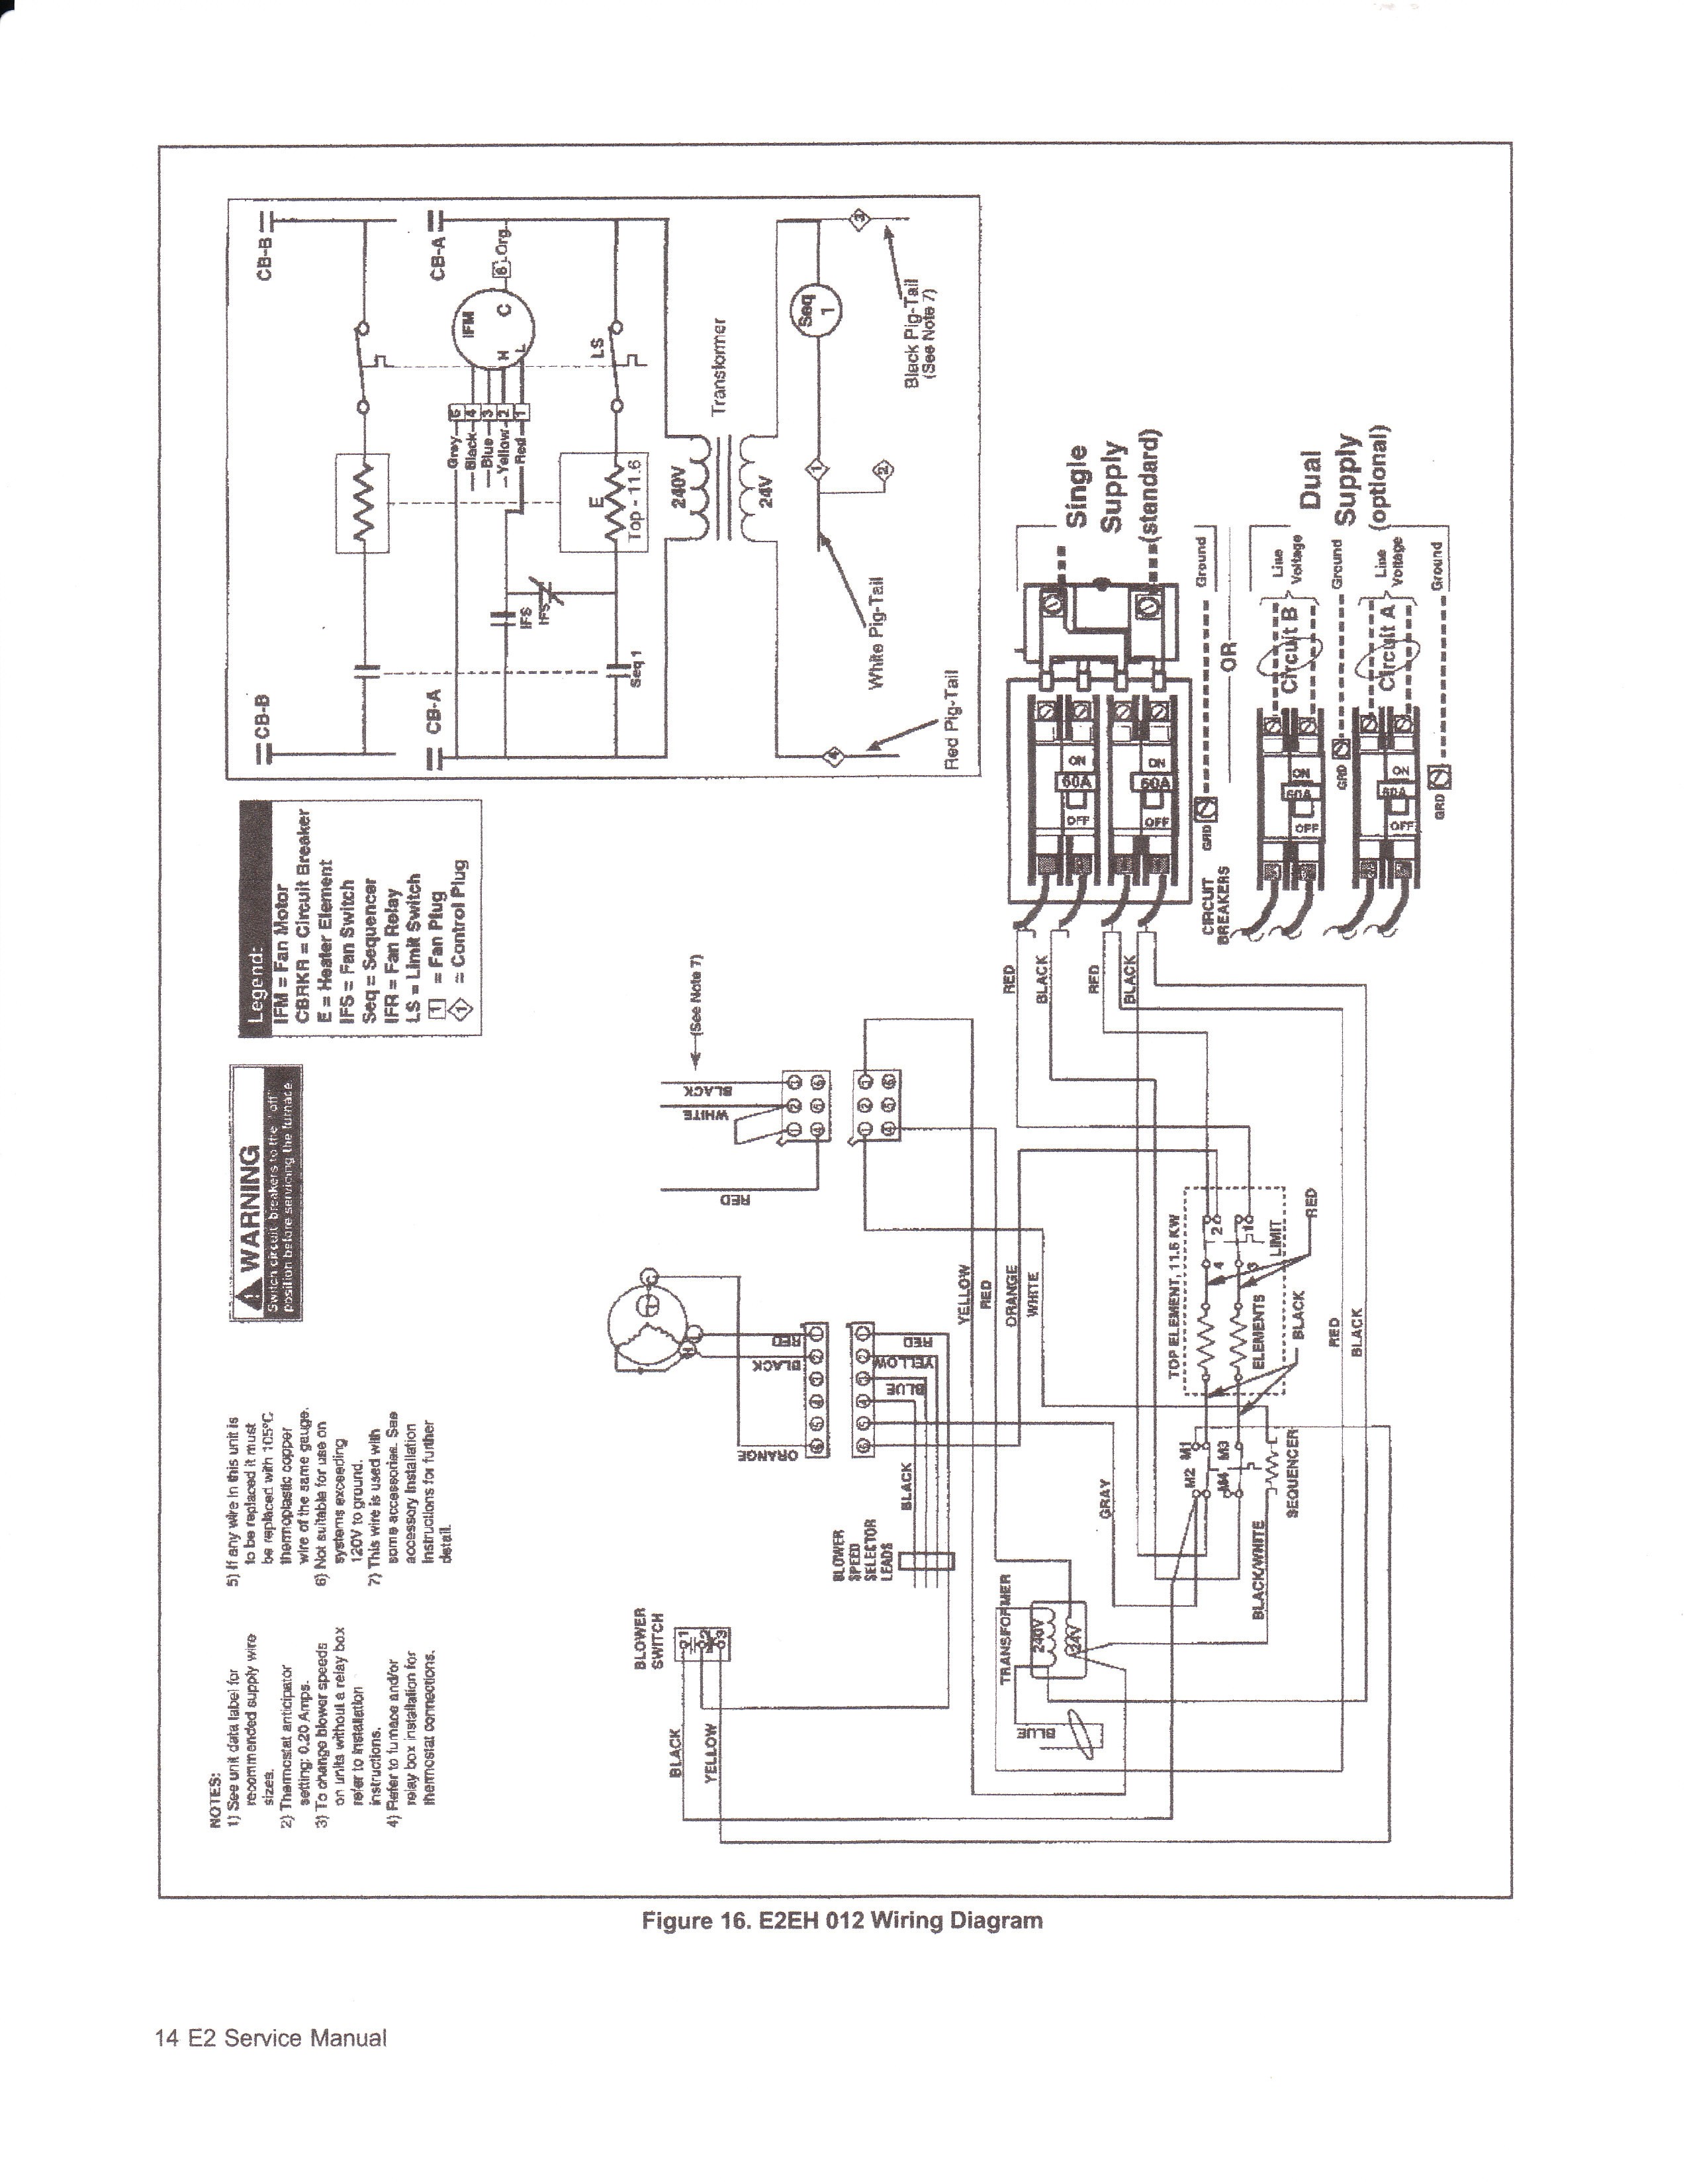 Wiring Diagram for Furnace with Ac New Electric Furnace Wiring Diagram Sequencer